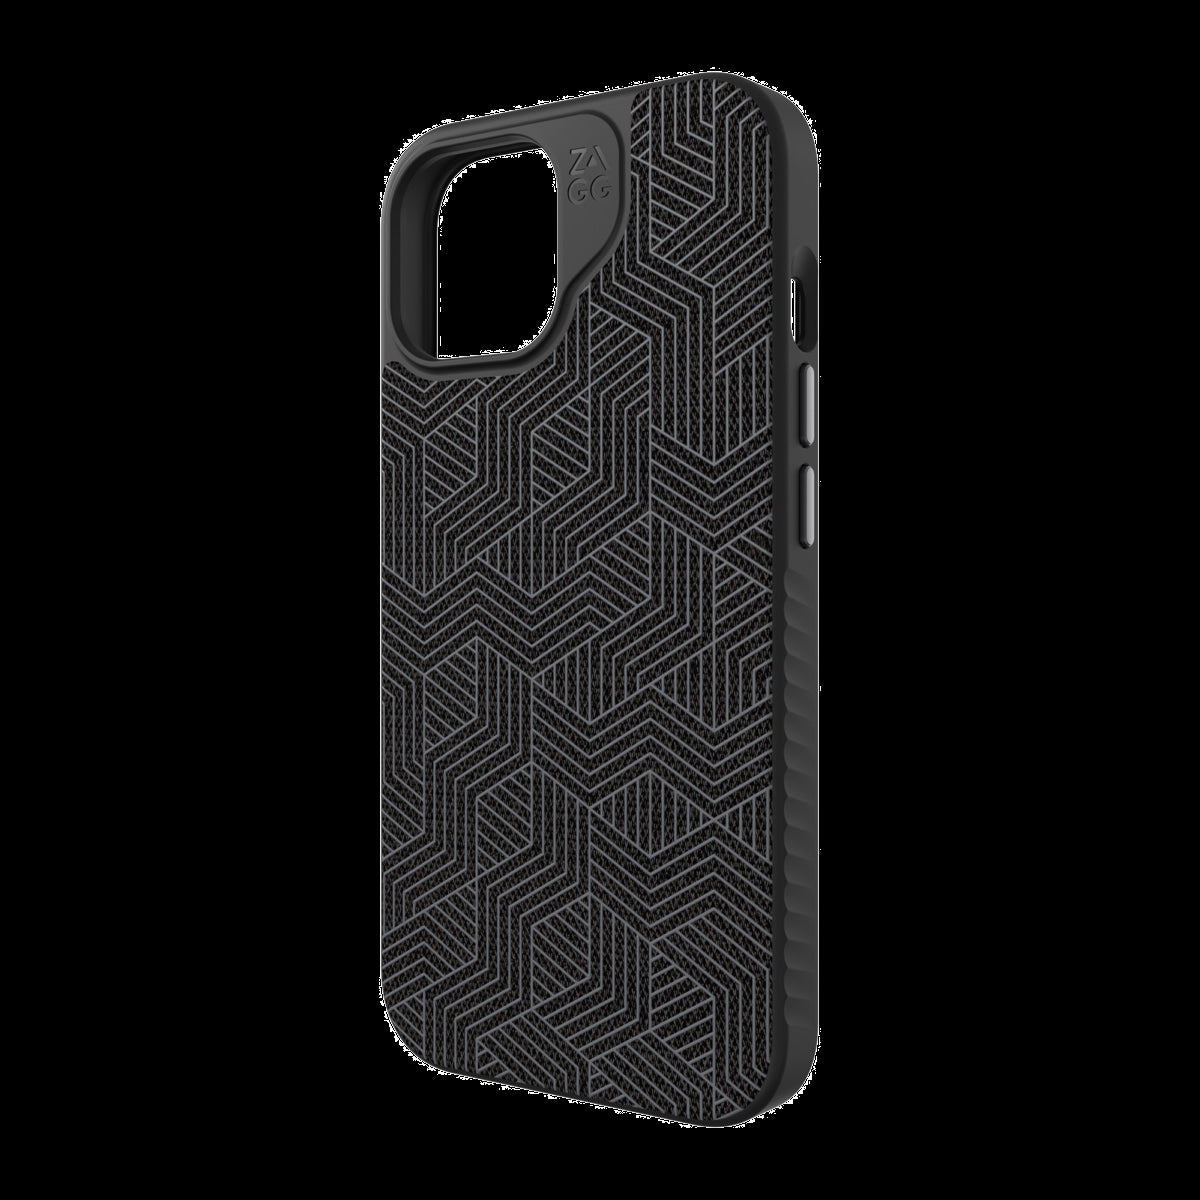 Strengthened with Graphene, ZAGG's London Snap series case is a fusion of sophistication and style that is backed by 13 ft drop protection and seamless MagSafe compatibility.